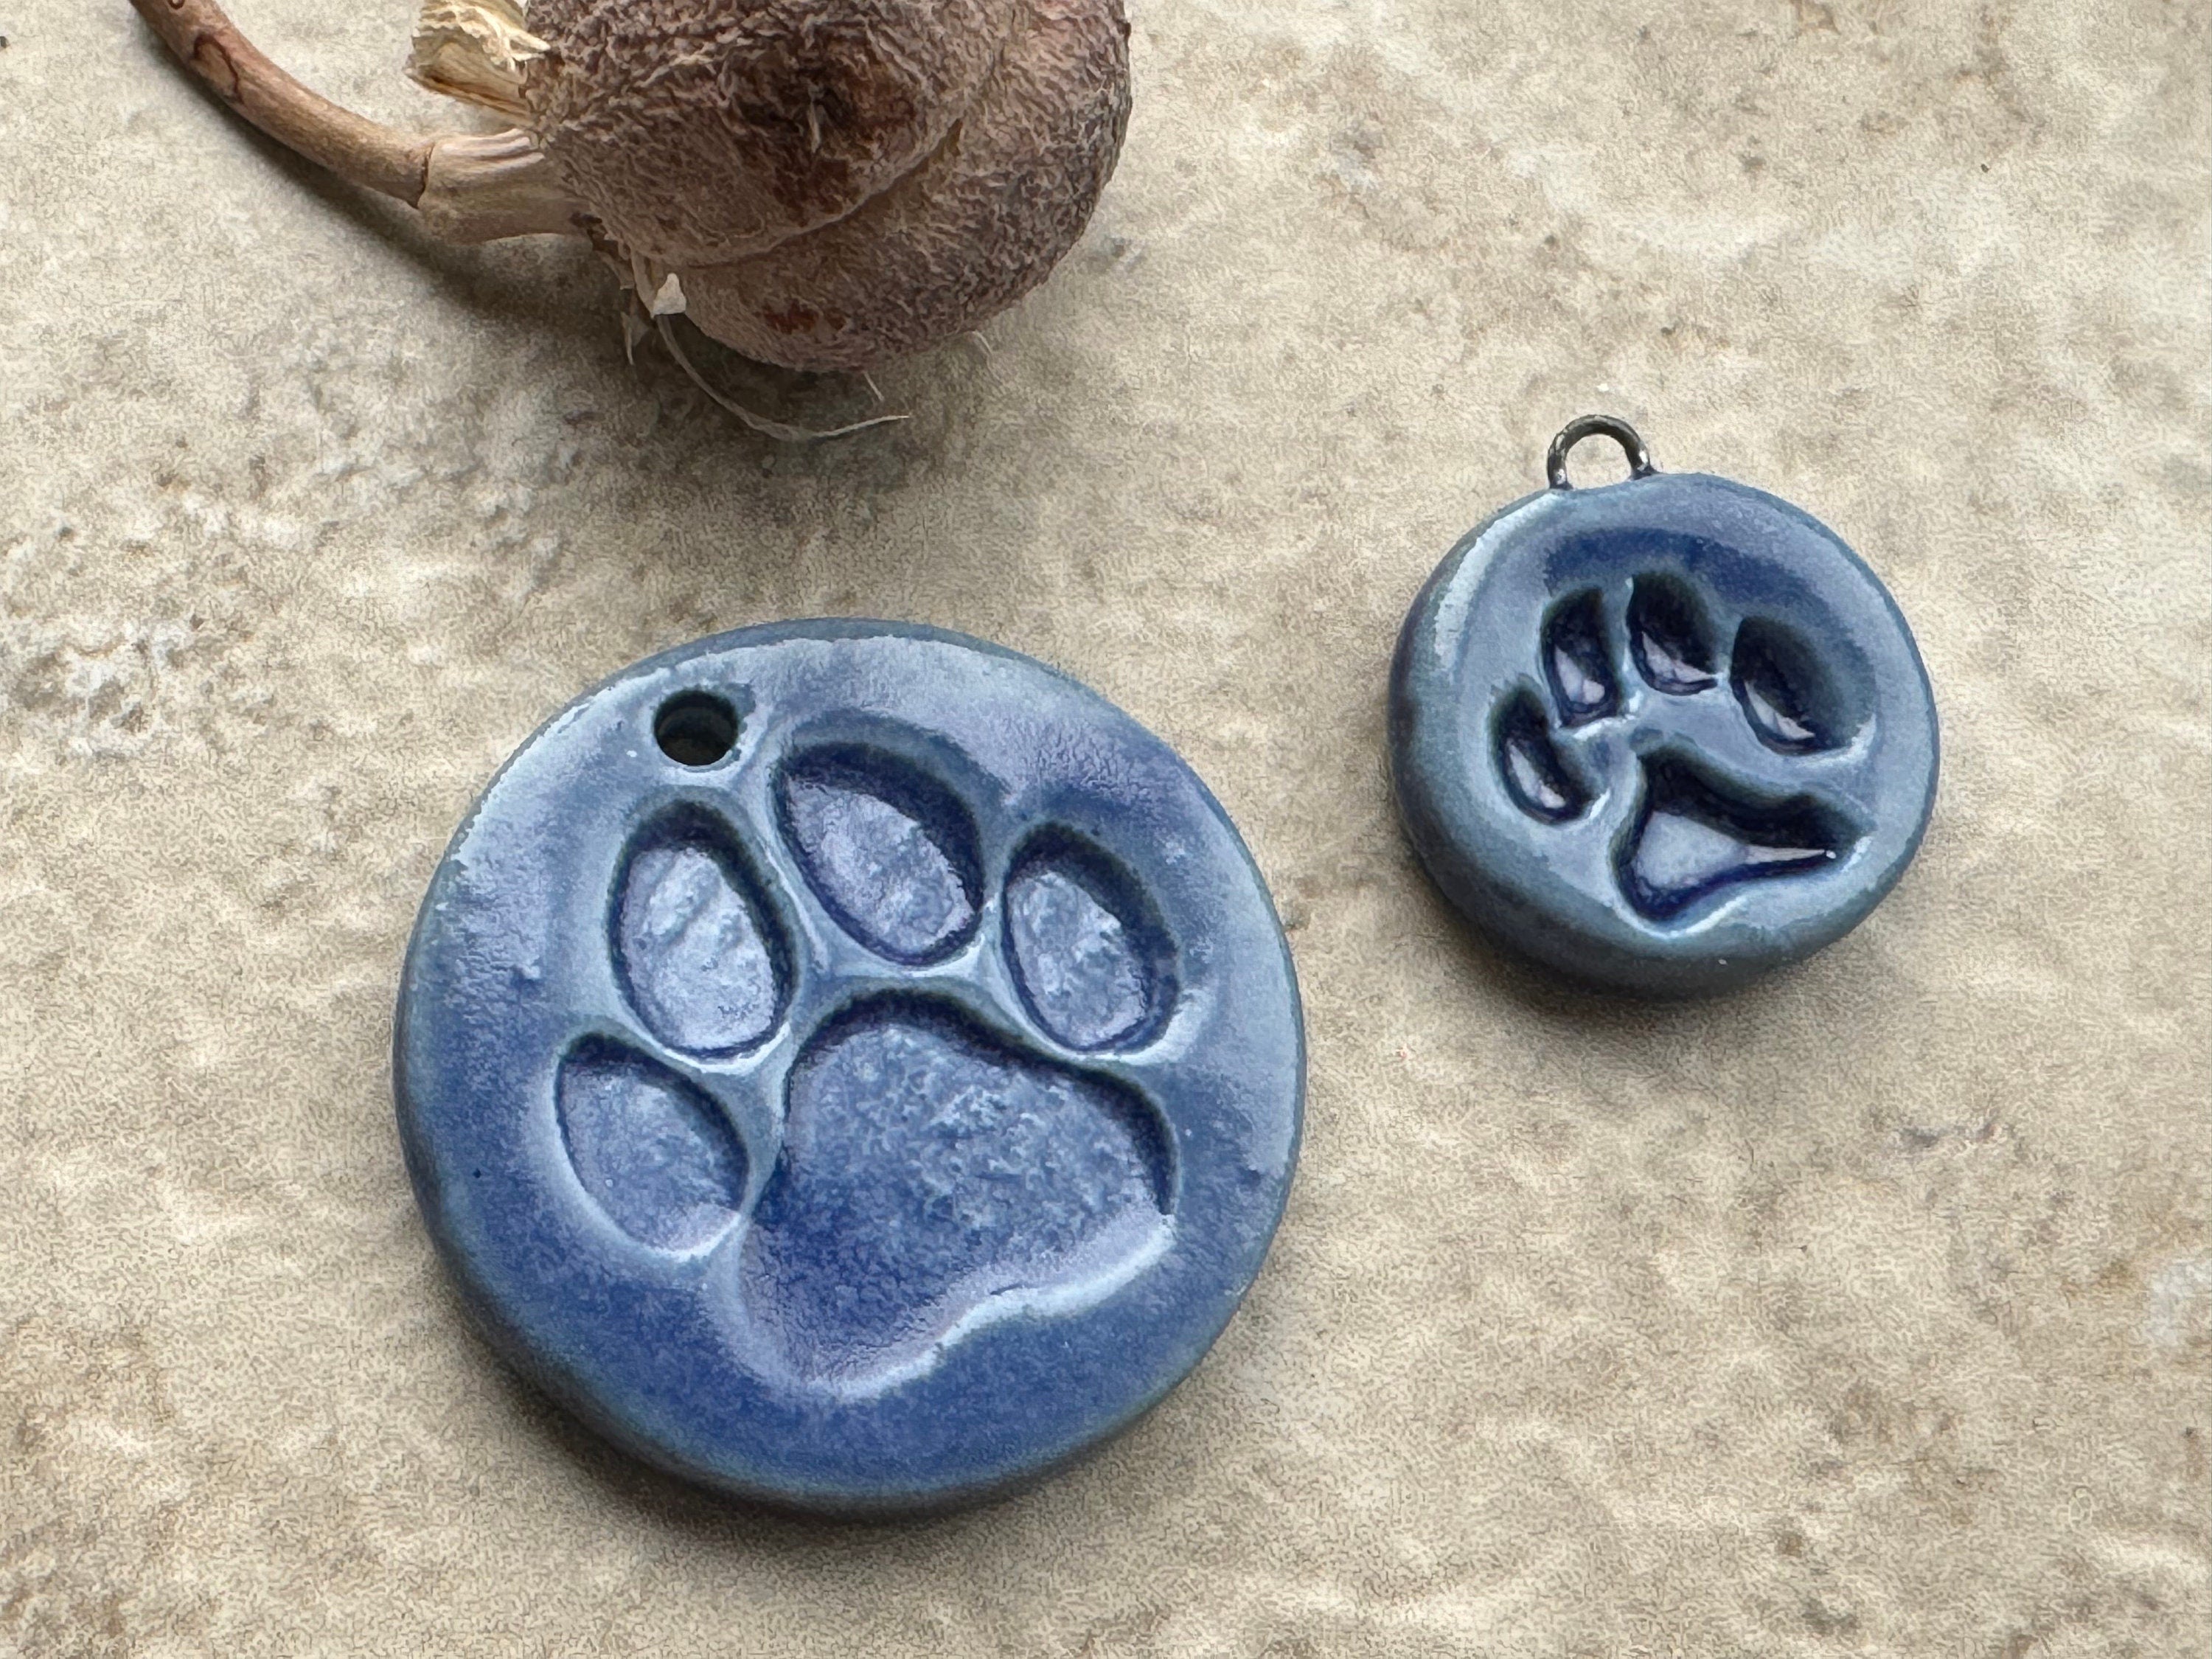 Blue Paw Print Pendant and Charms, Dog Round Pendant, Porcelain Ceramic Pendant, Dog Paw Charms, Jewelry Making Components